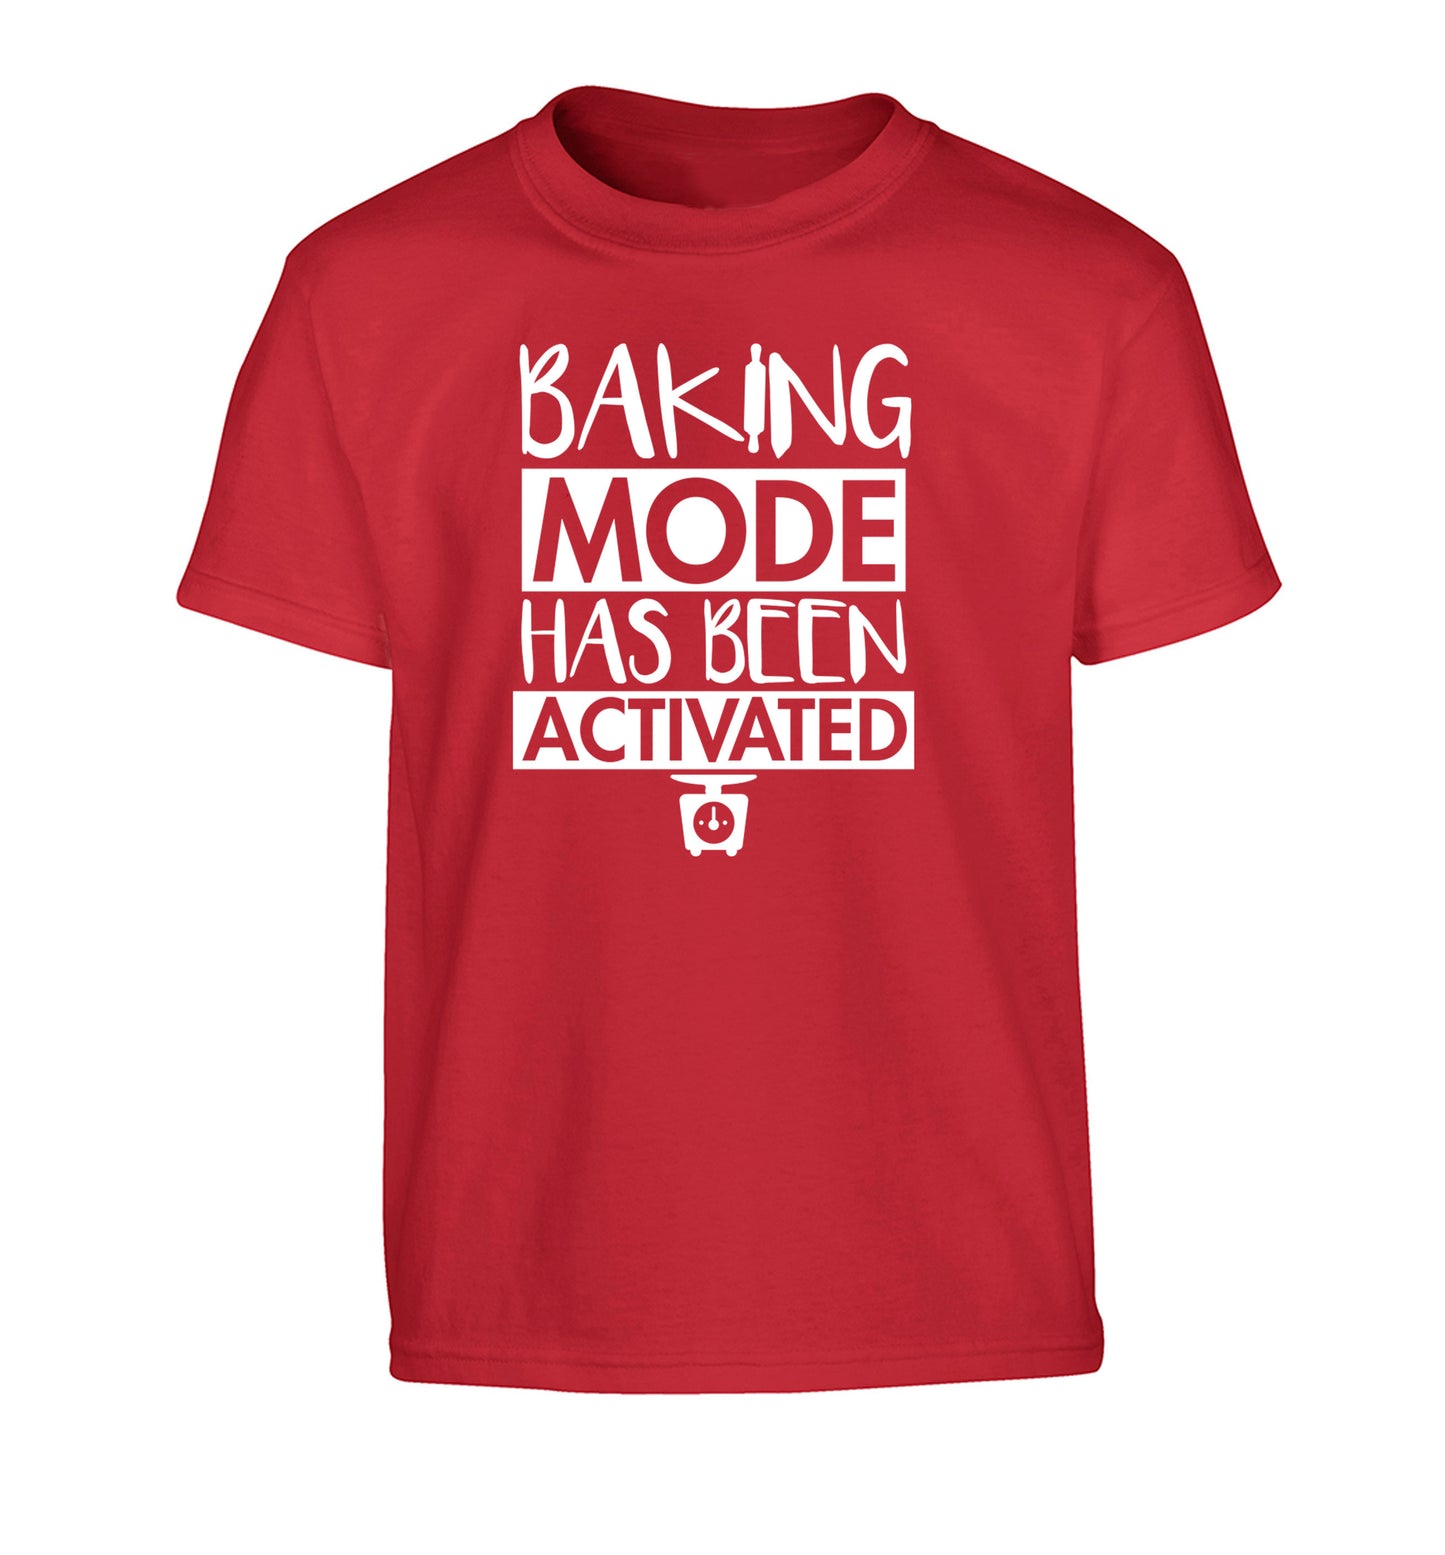 Baking mode has been activated Children's red Tshirt 12-14 Years